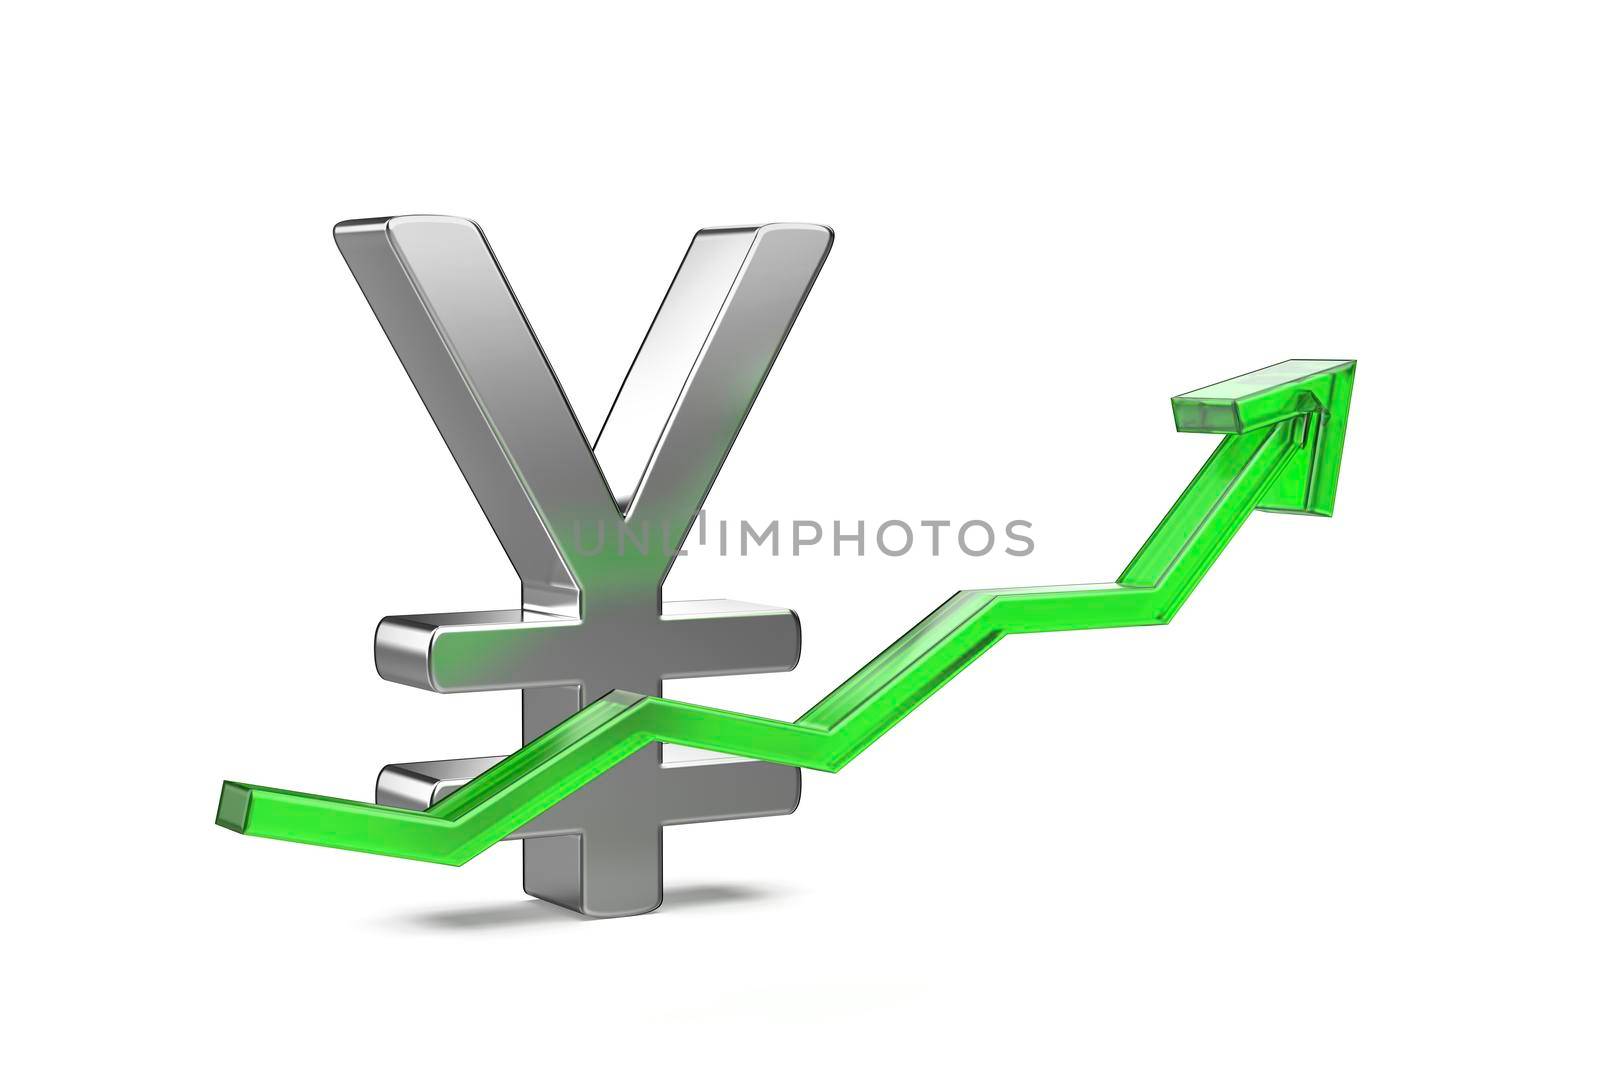 Japanese Yen or Chinese Yuan symbol with green arrow pointing up
 by magraphics